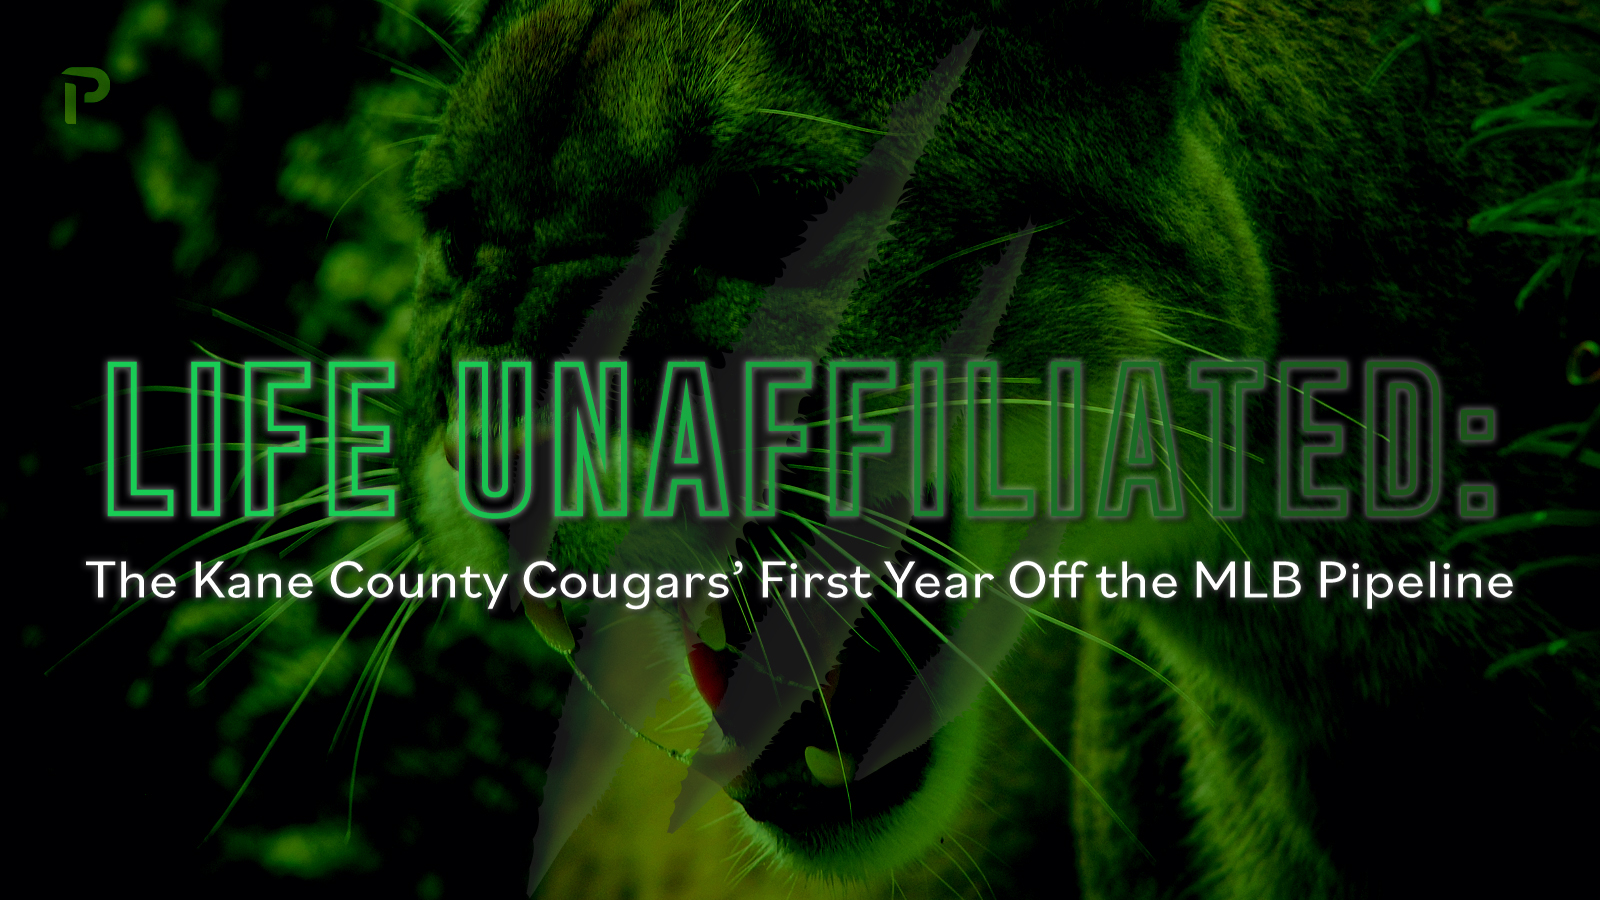 Kane County Cougars Schedule 2022 Life Unaffiliated: The Kane County Cougars' First Year Off The Mlb Pipeline  - Pitcher List